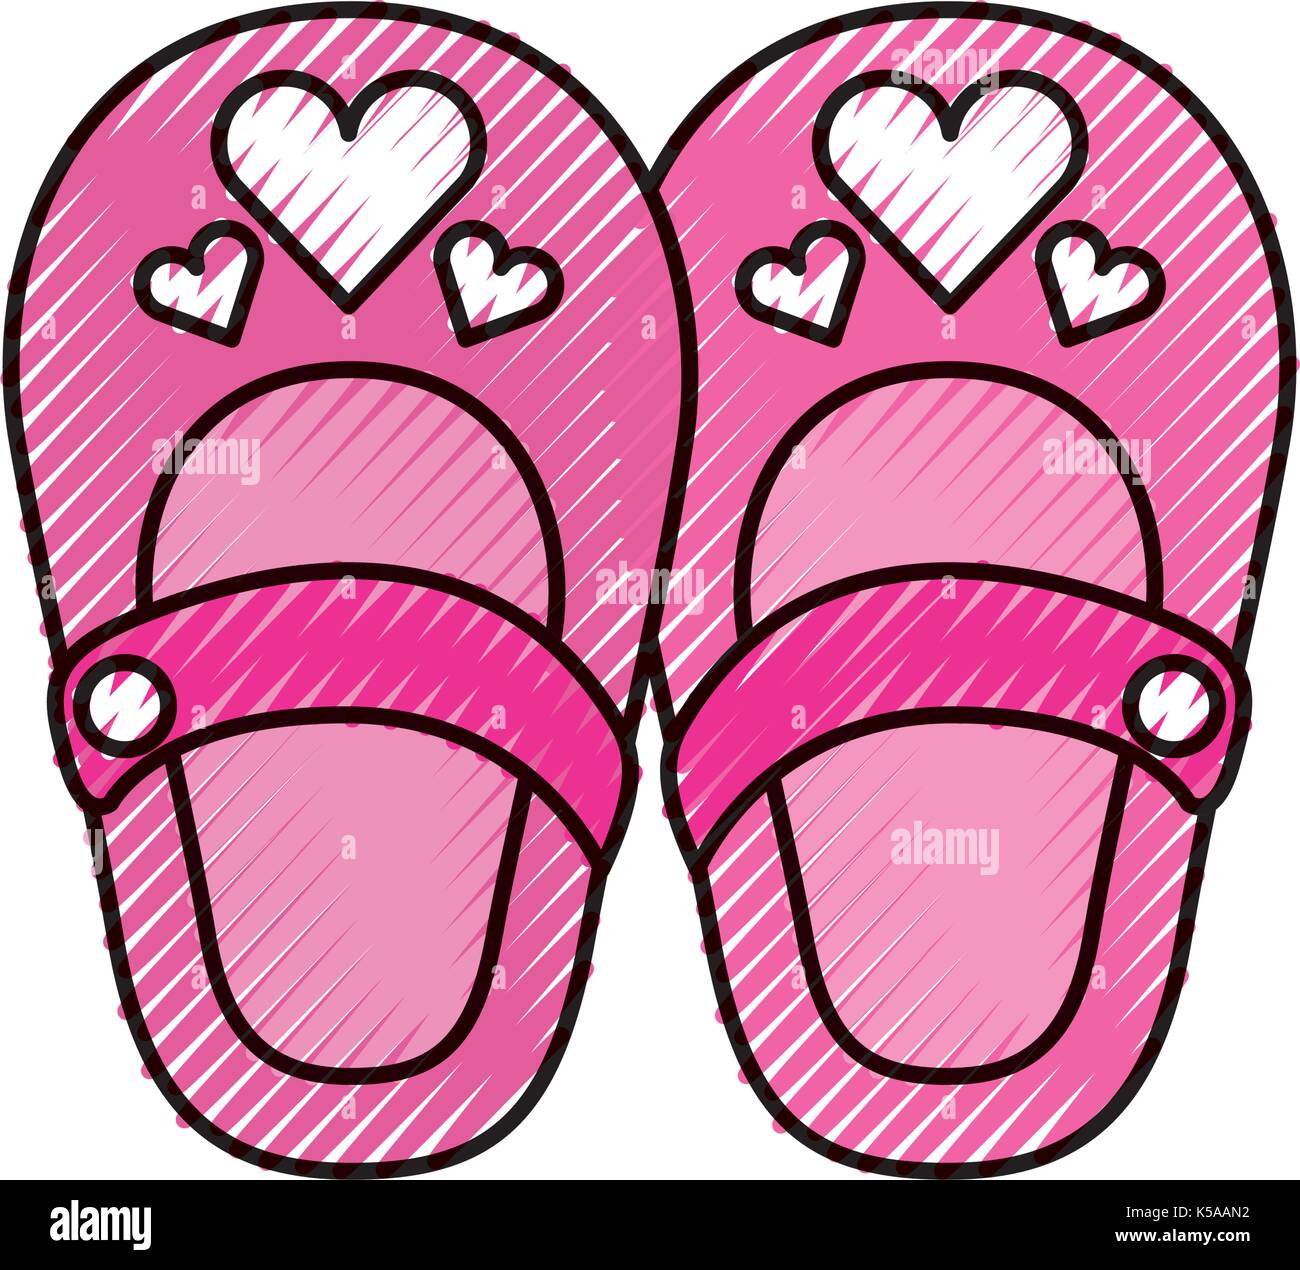 Baby booties illustration Cut Out Stock Images & Pictures - Alamy